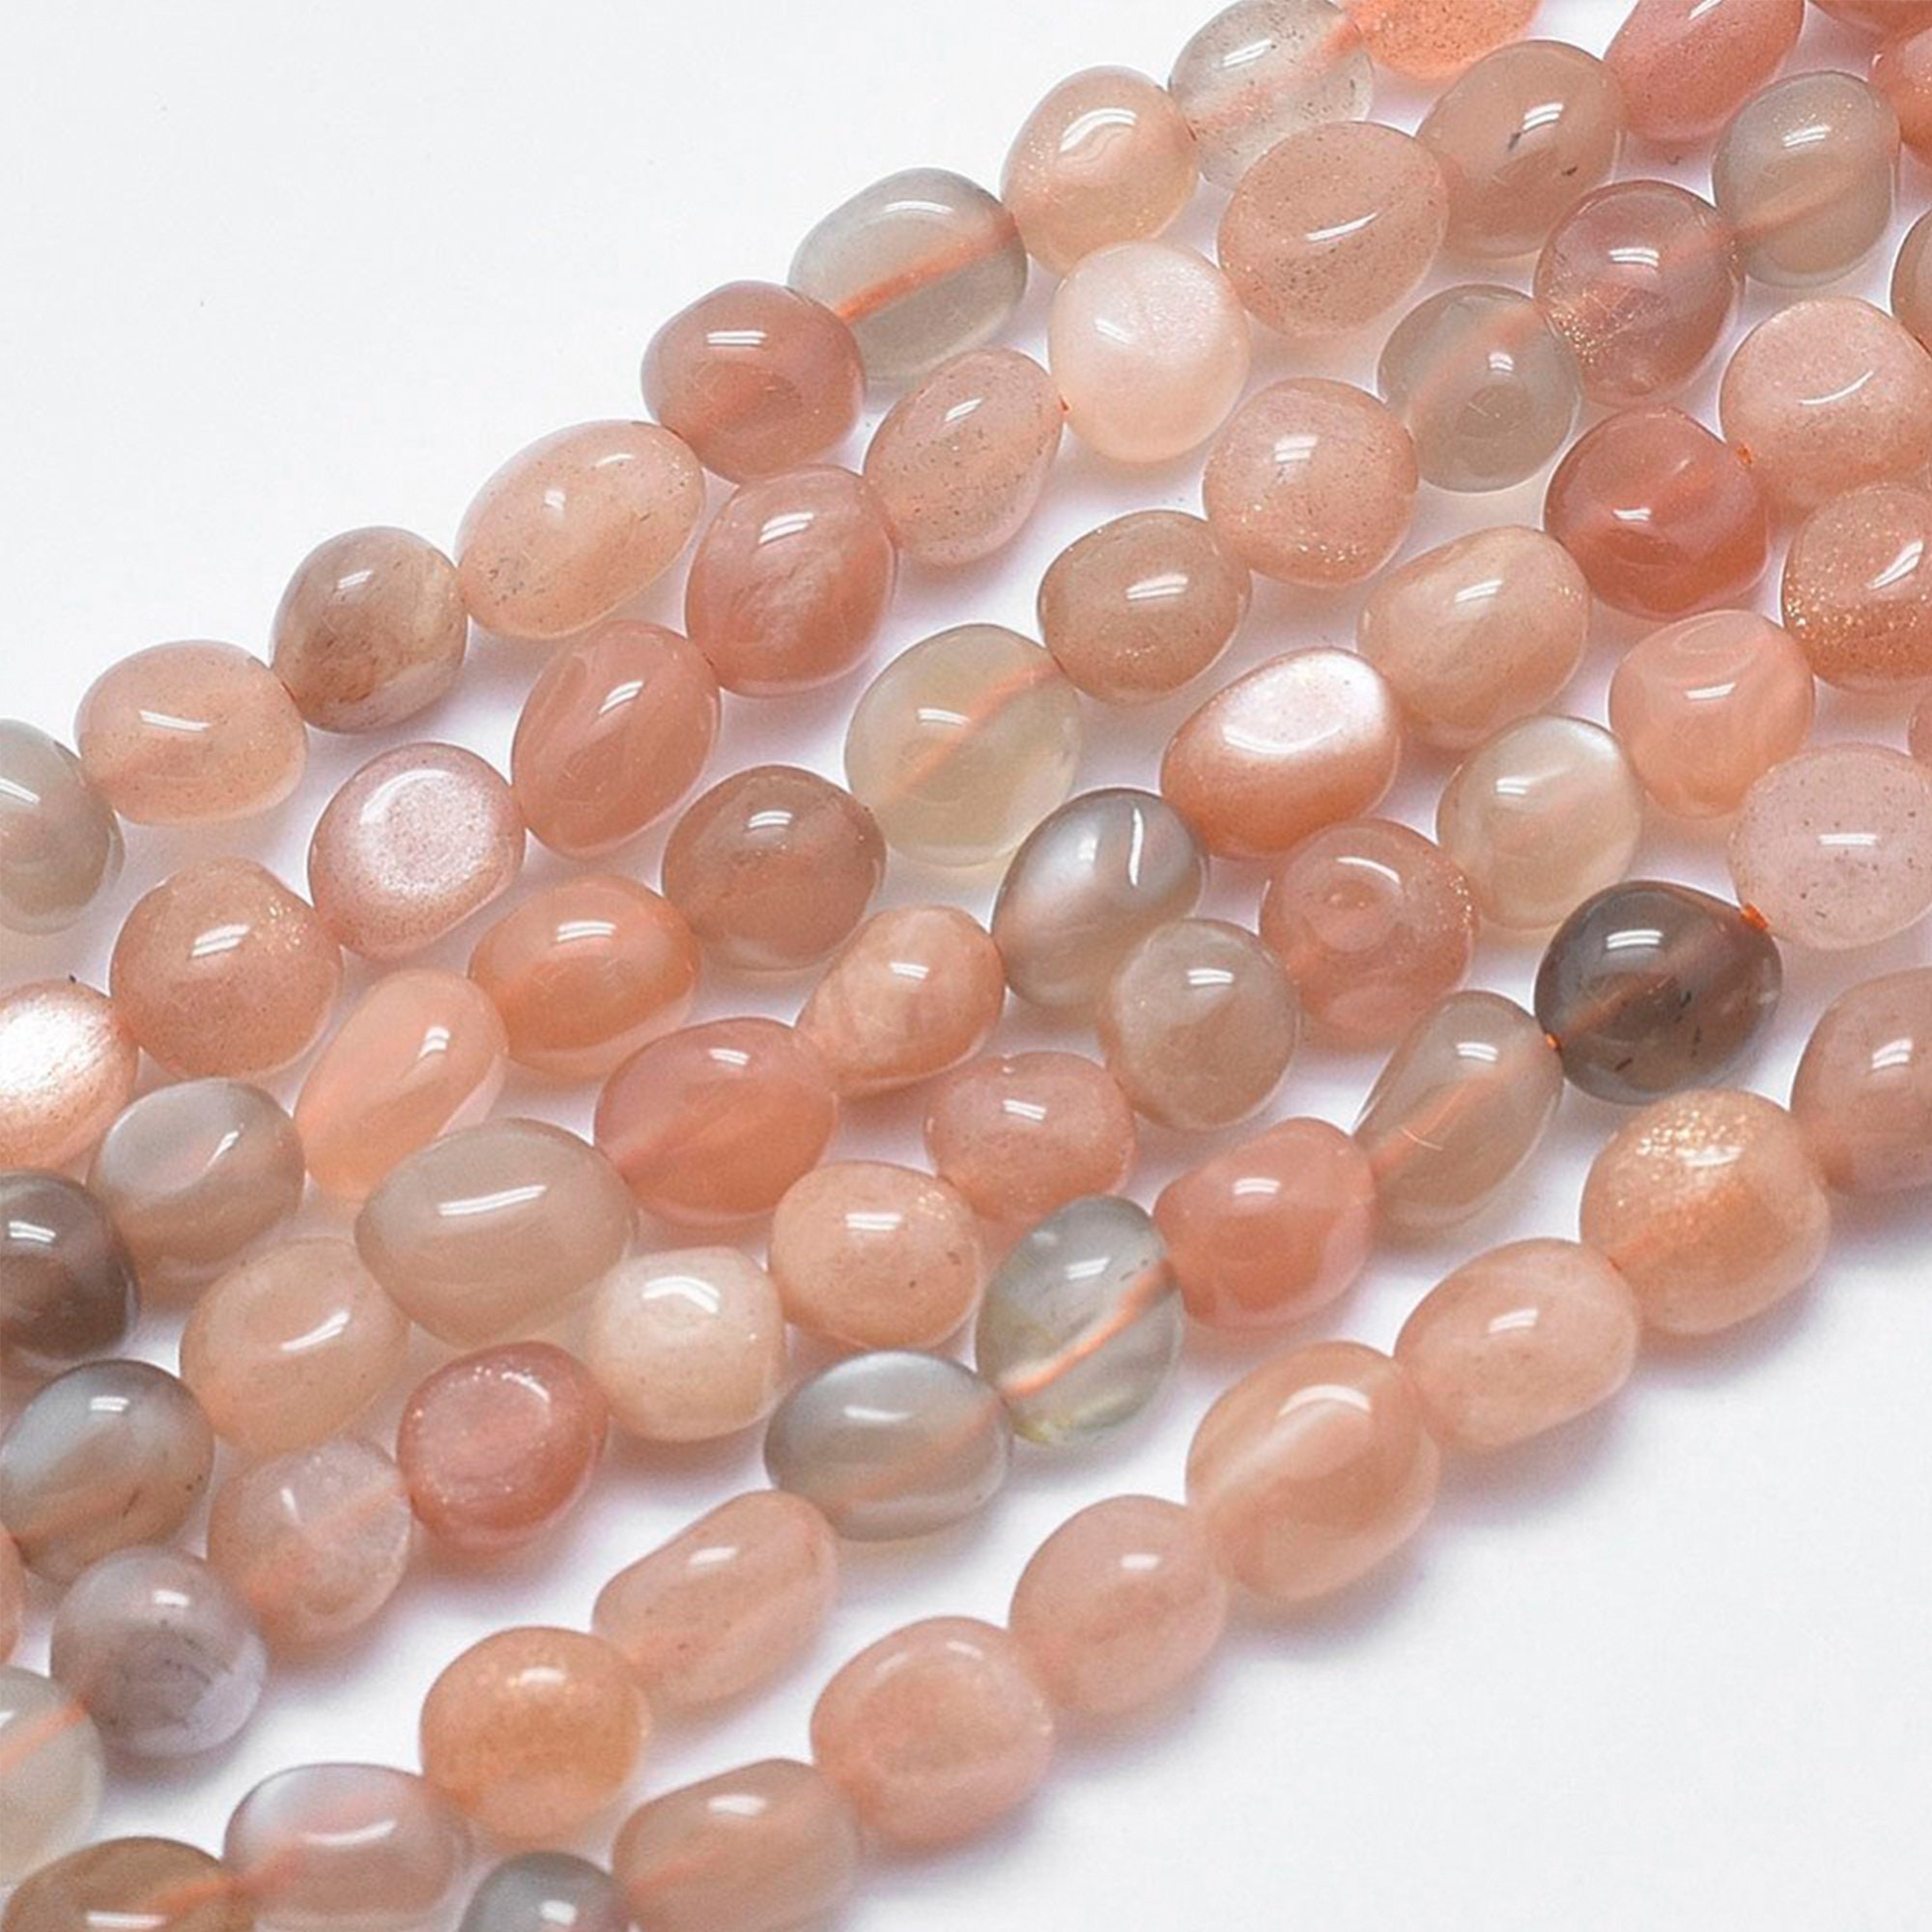 12009 MoonStone Nugget 4x5-7mm Gemstone Beads from India peach white grey 34in 